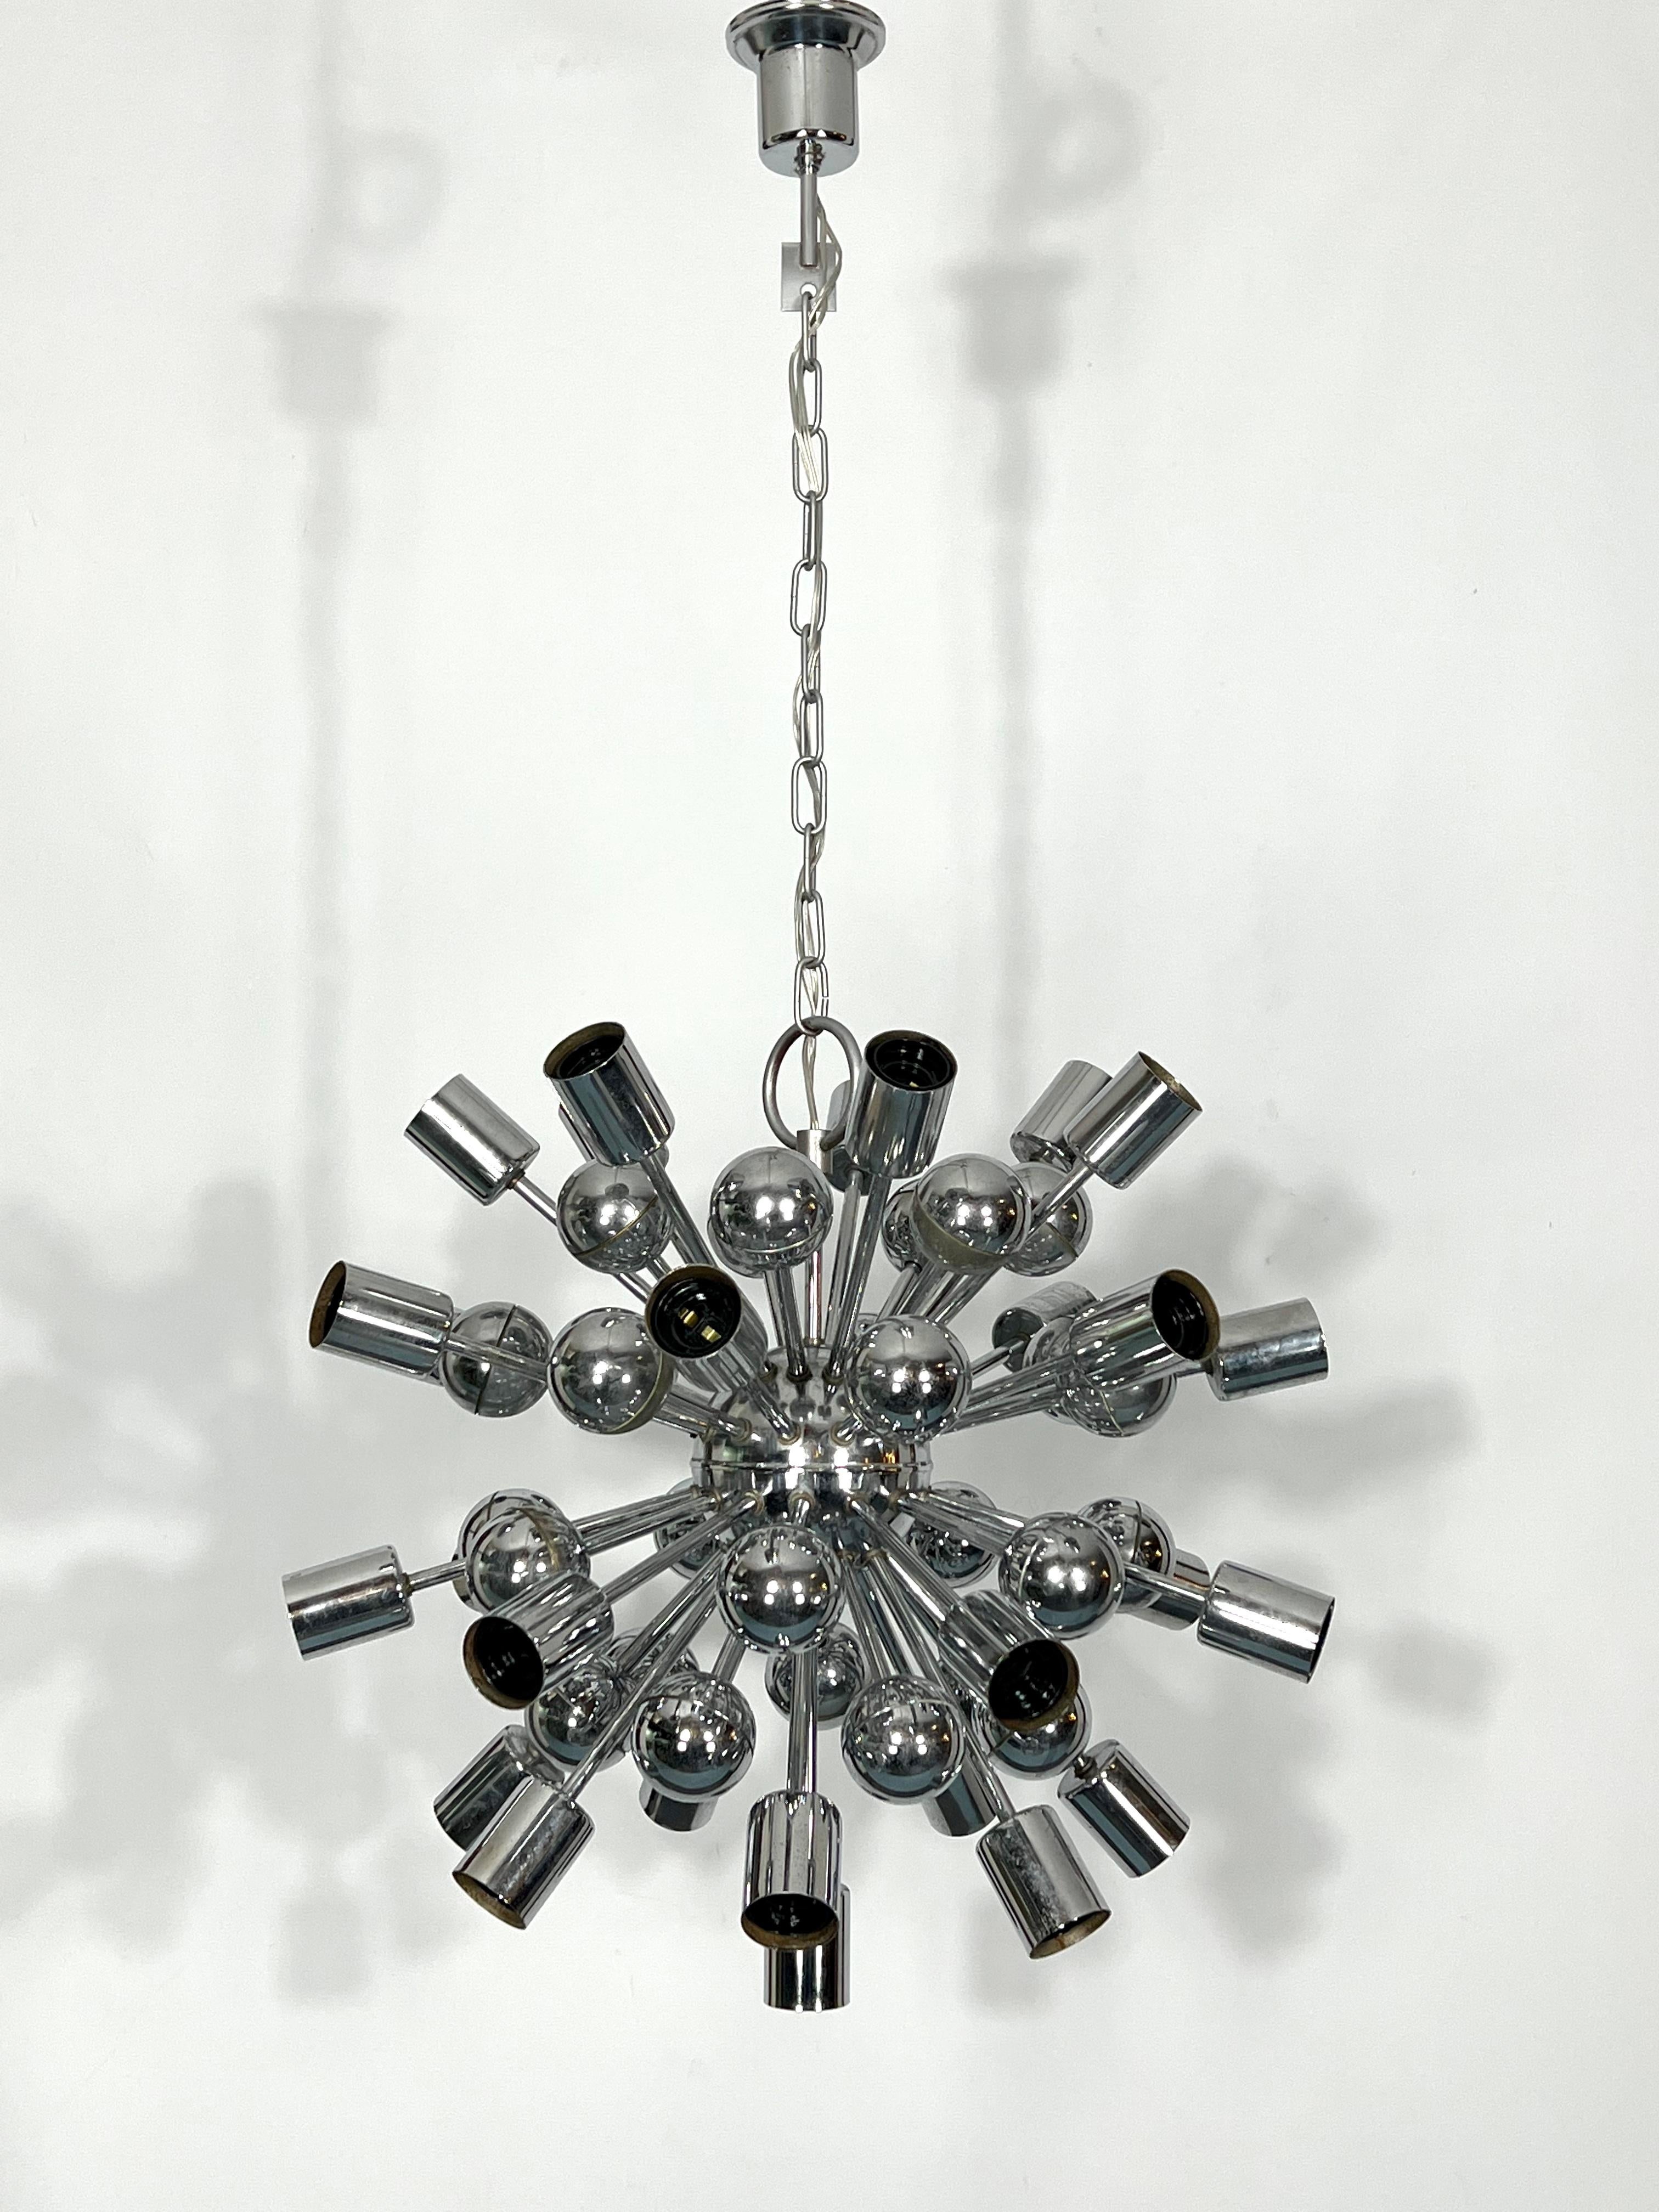 Very good vintage condition for this chandelier designed by Reggiani and produced in Italy during the 70s. Some trace of age and use. Full working with EU standard, adaptable on demand for USA standard.